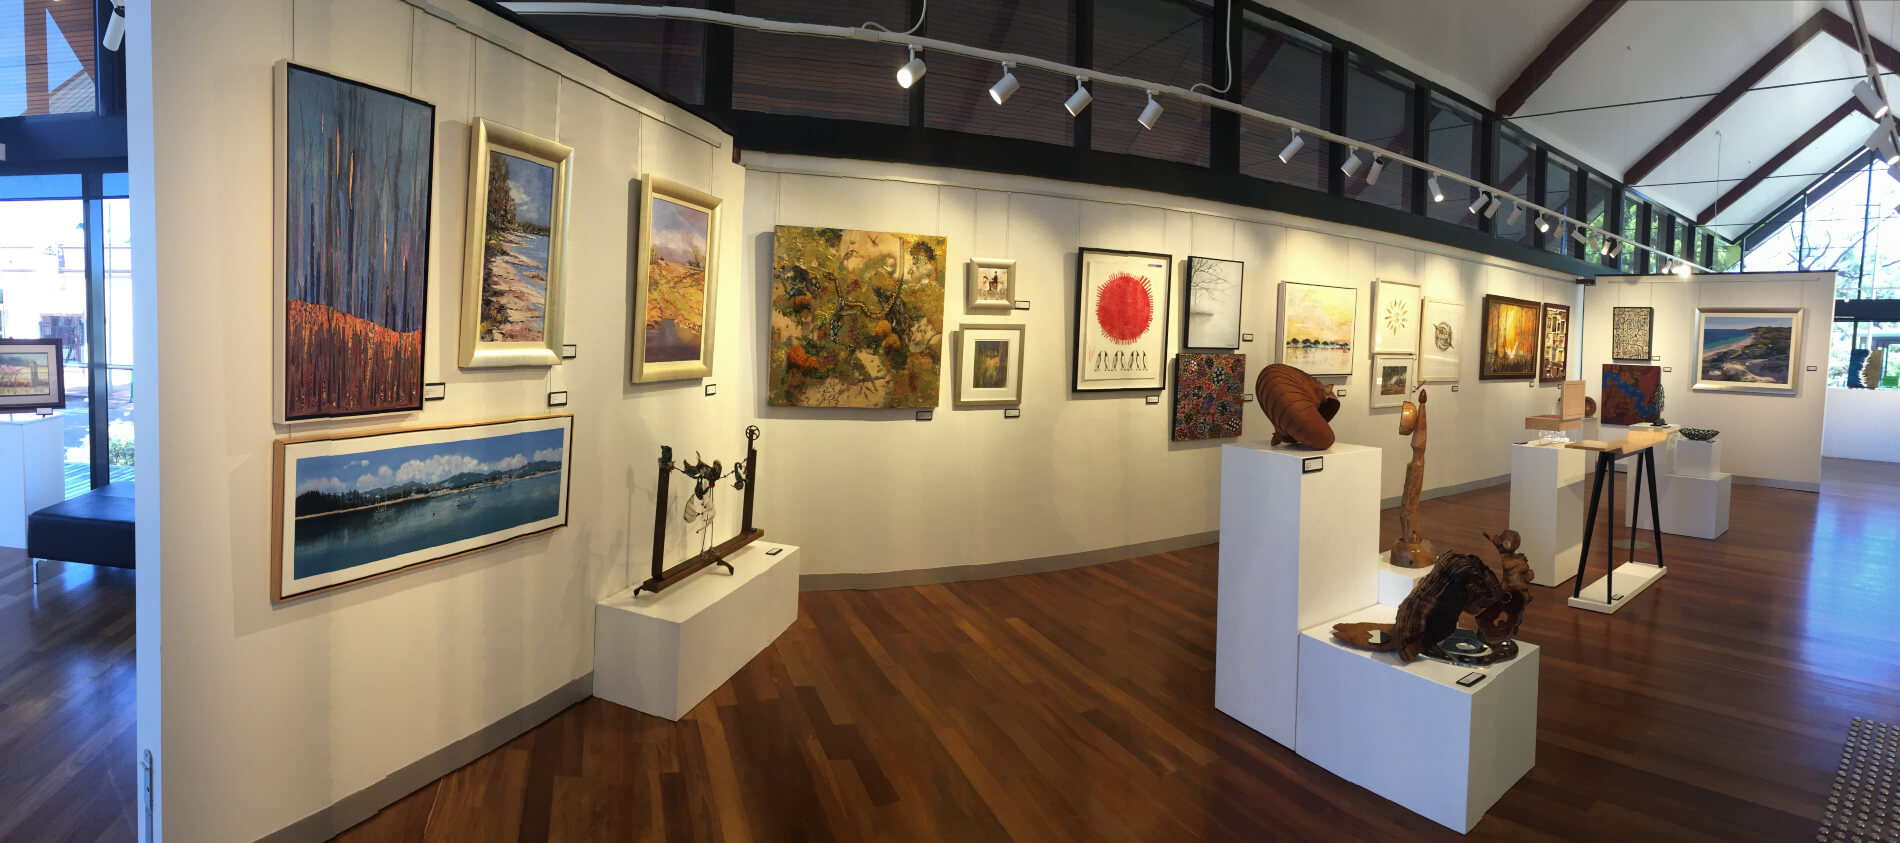 Zig Zag Gallery with Lions Club Art pieces from the 2018 exhibition